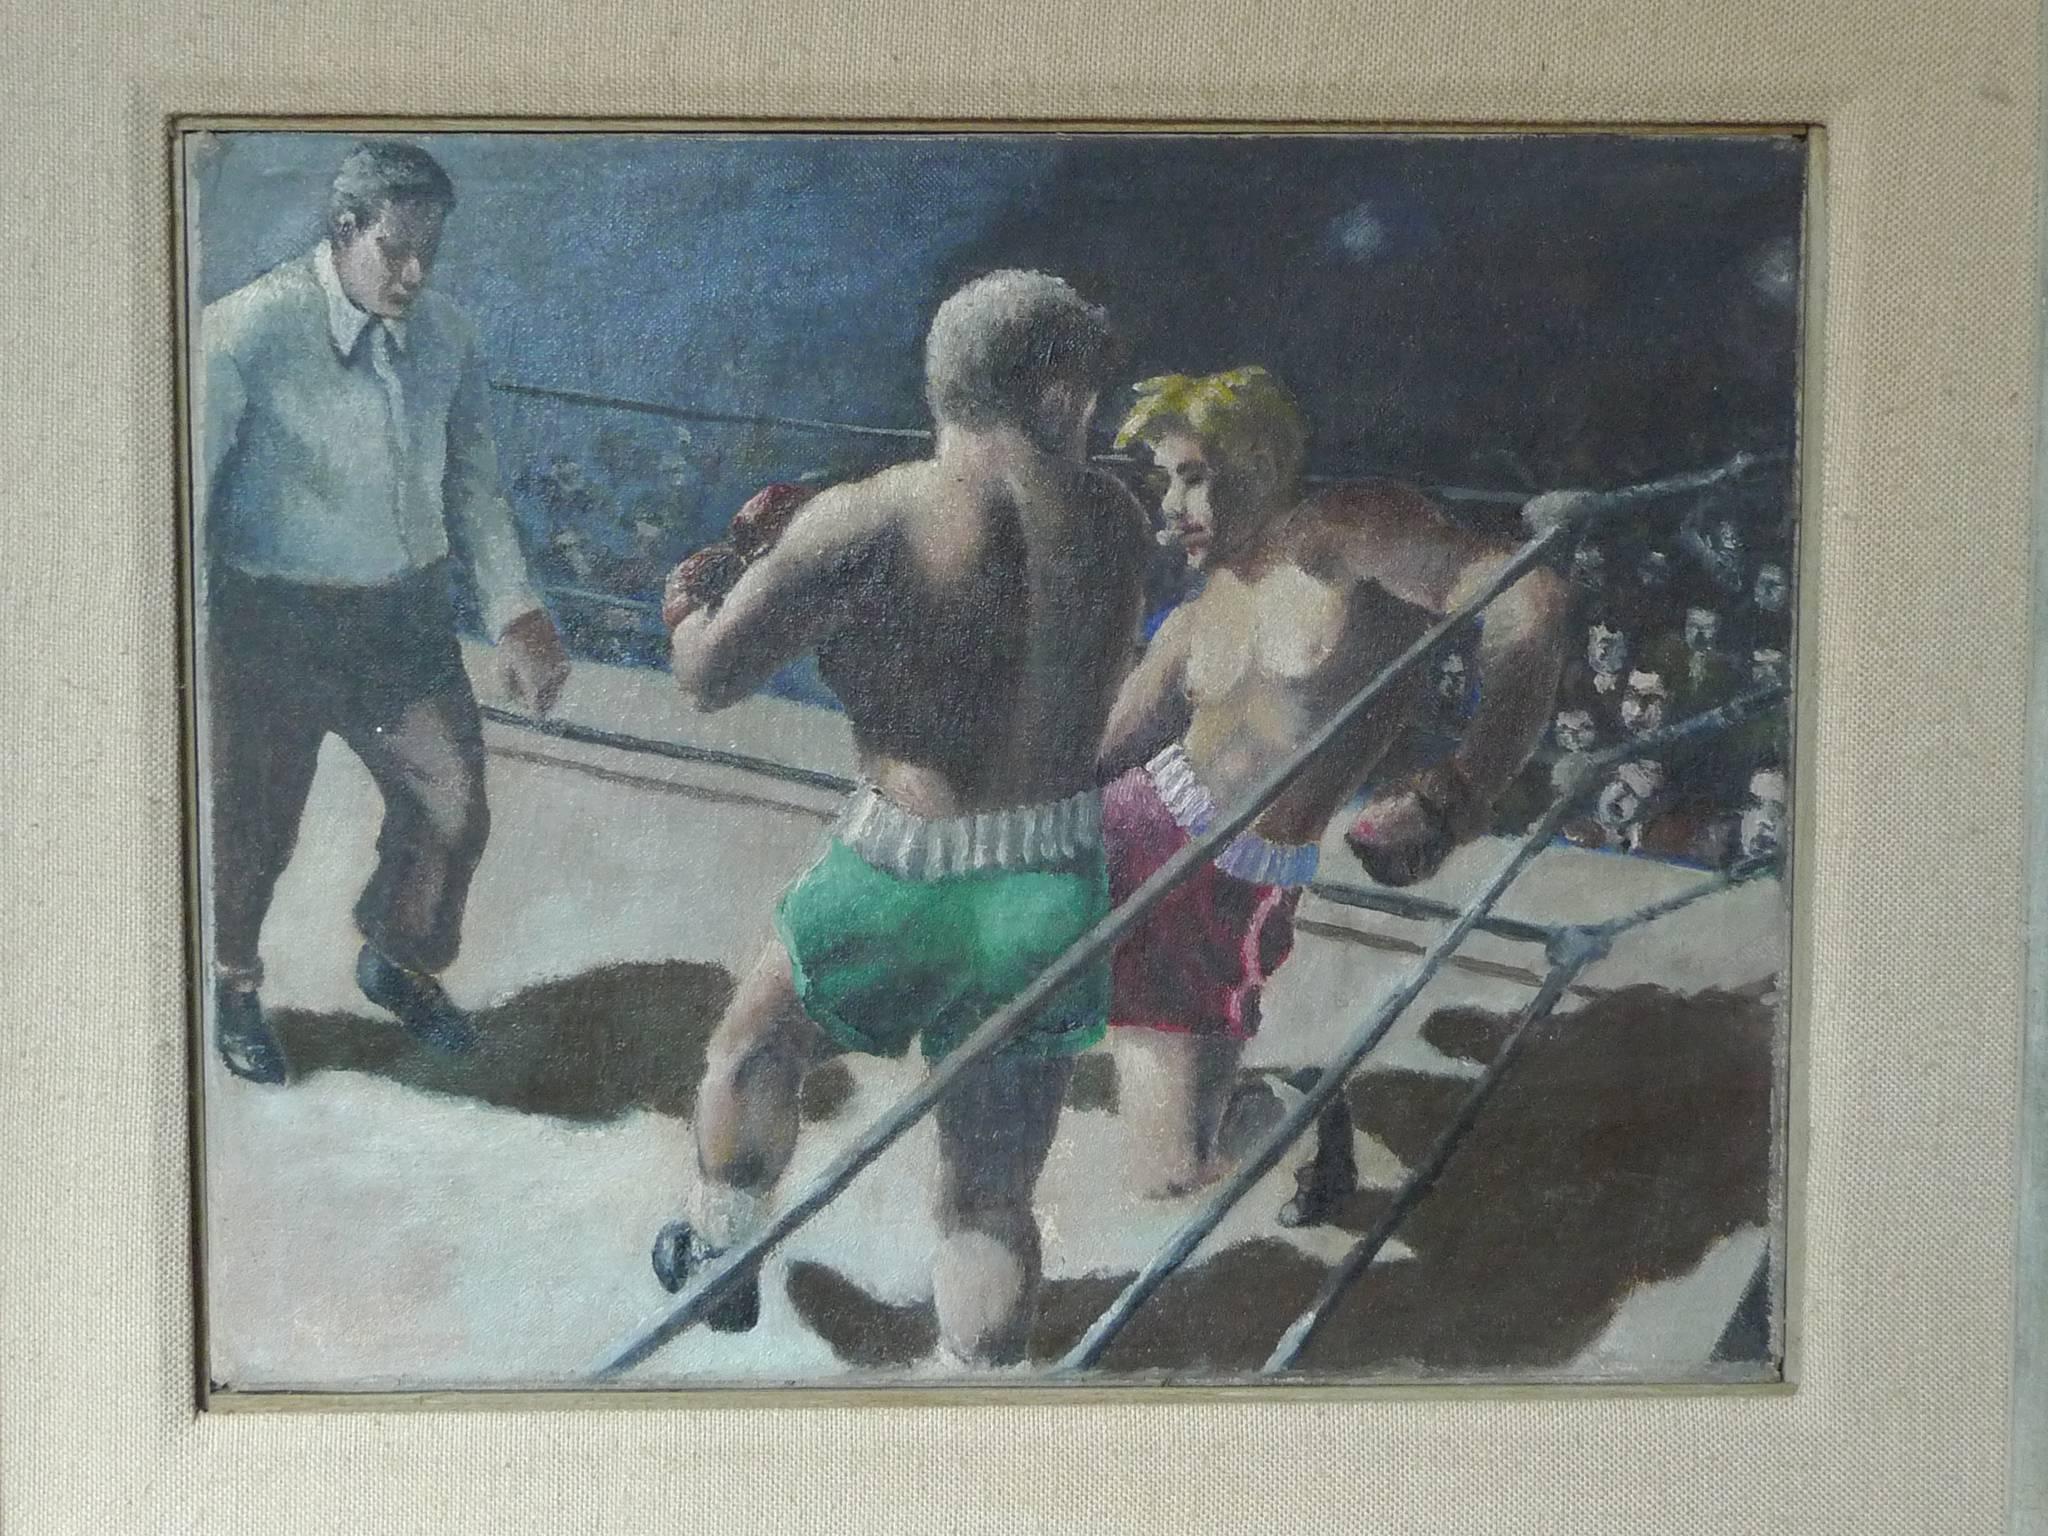 American Boxing Match, Oil Painting by Unknown Artist, after Robert Riggs